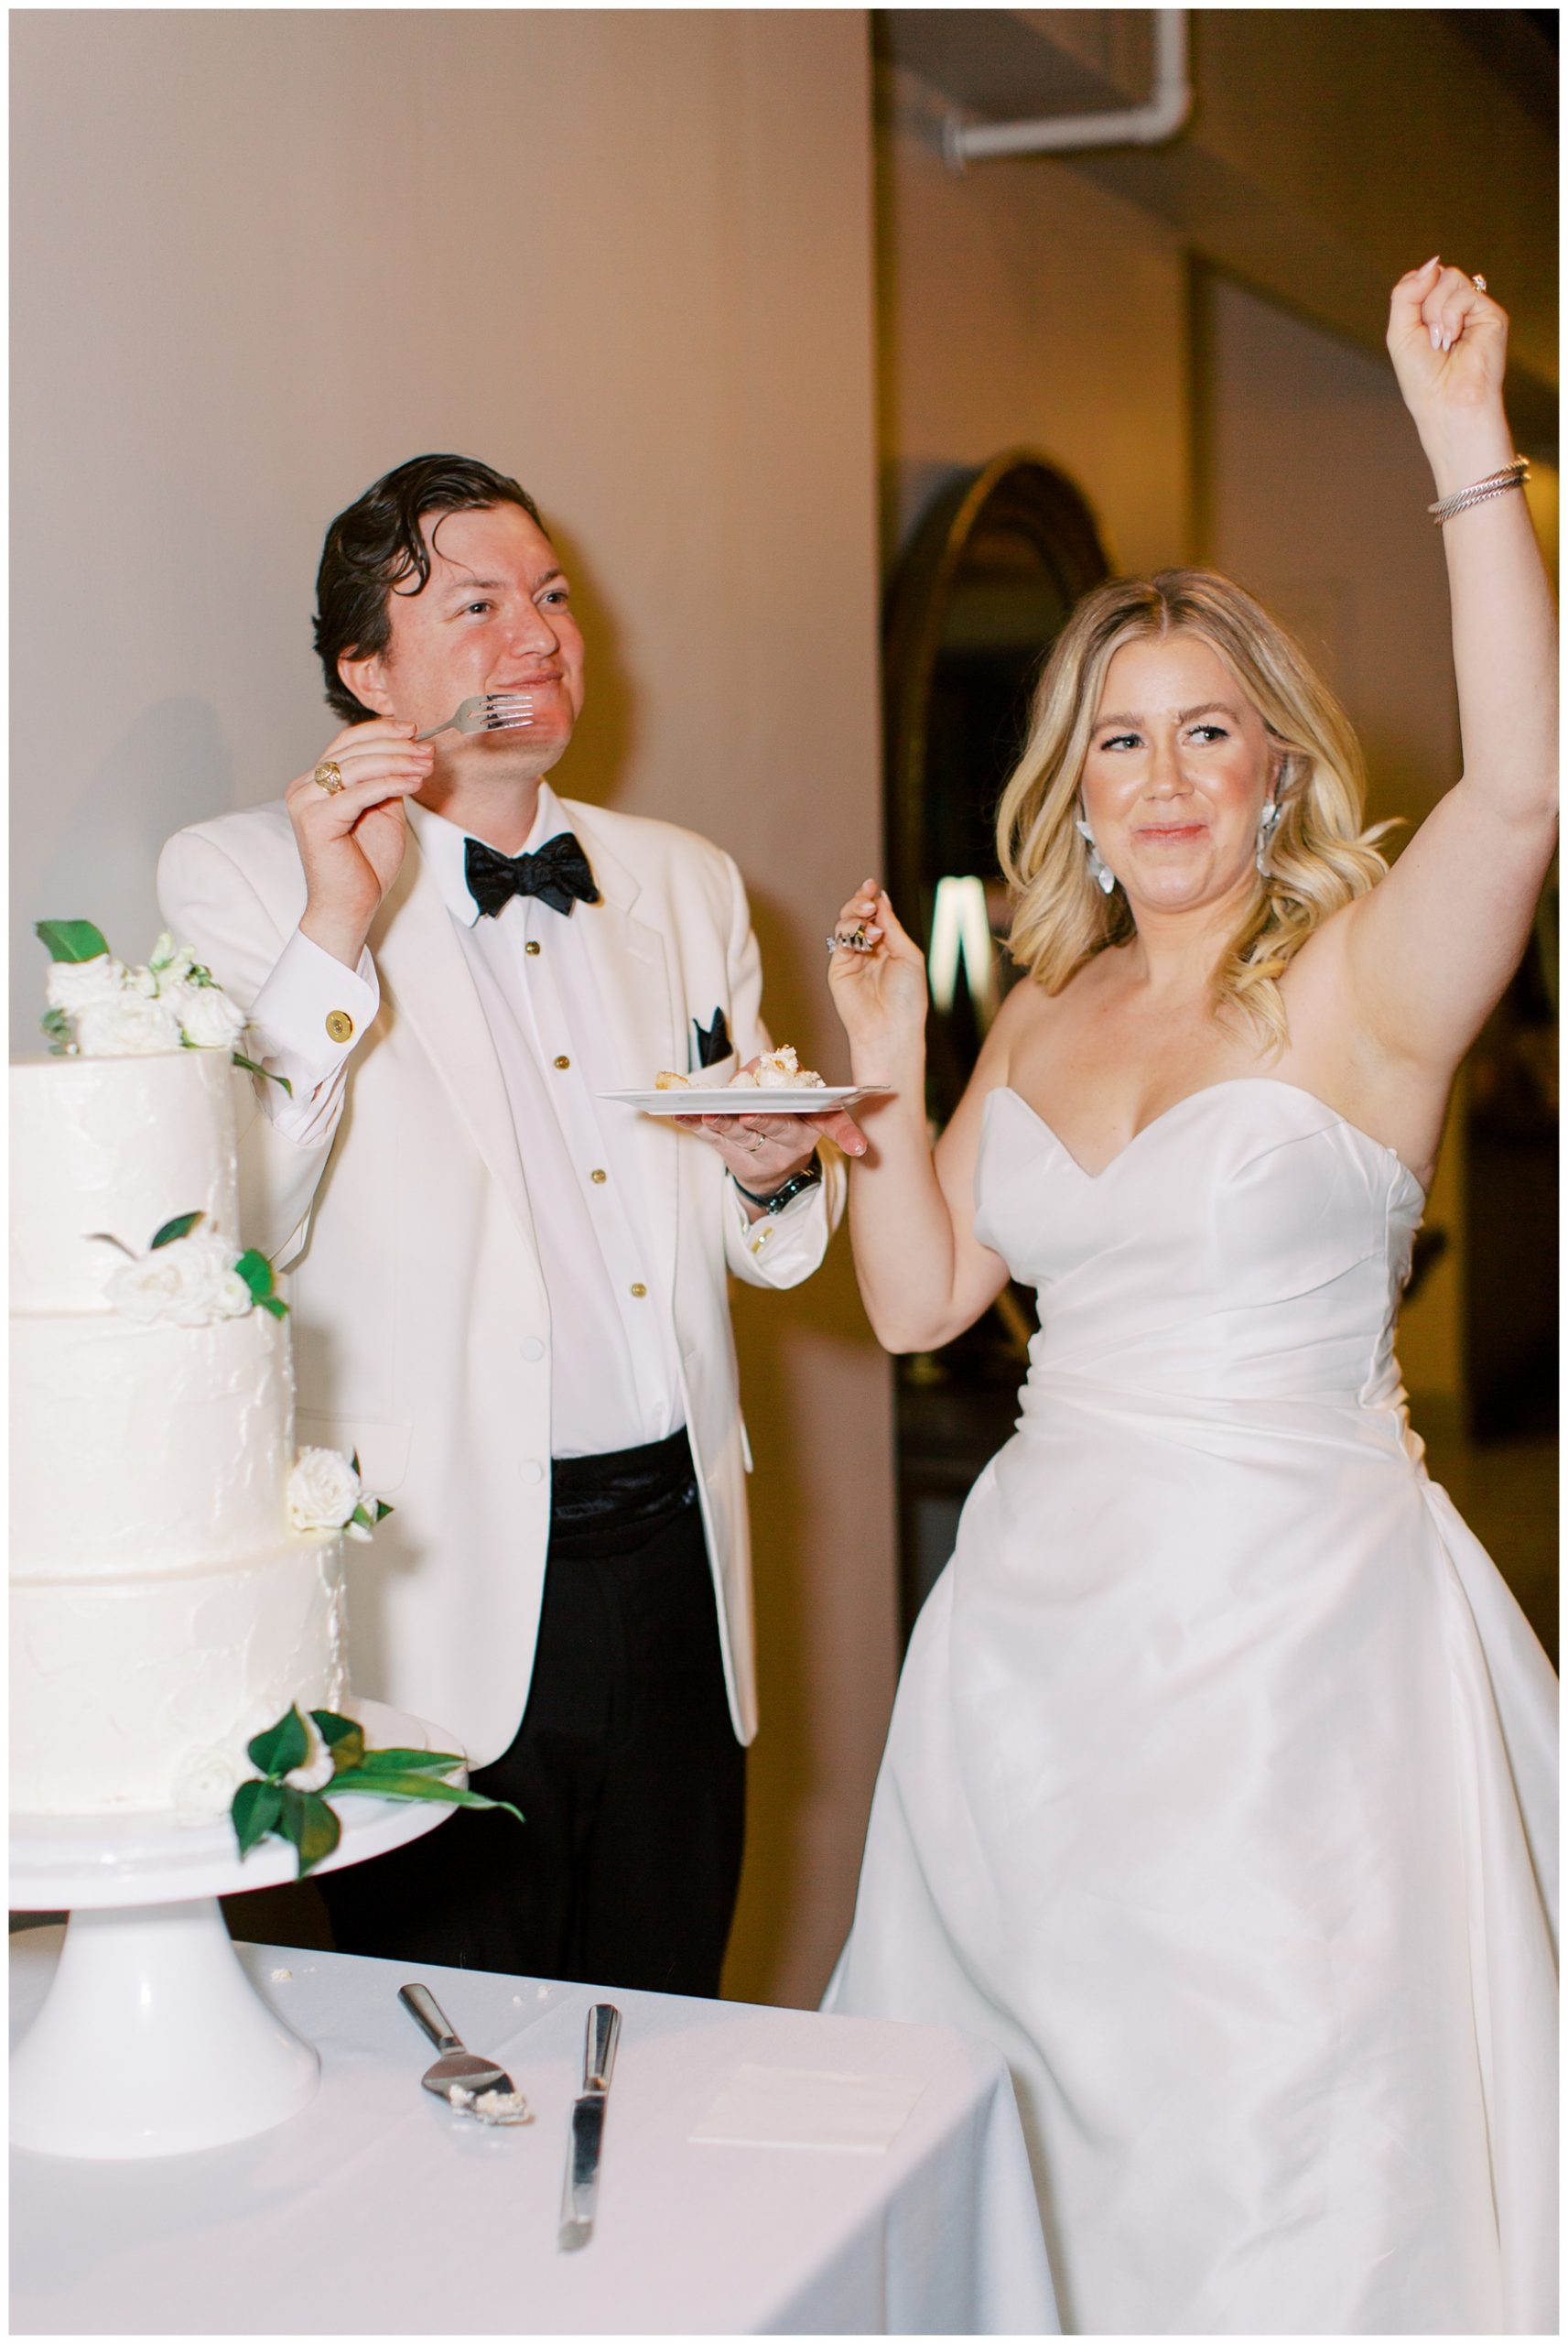 bride and groom cut wedding cake at Charlotte NC reception 